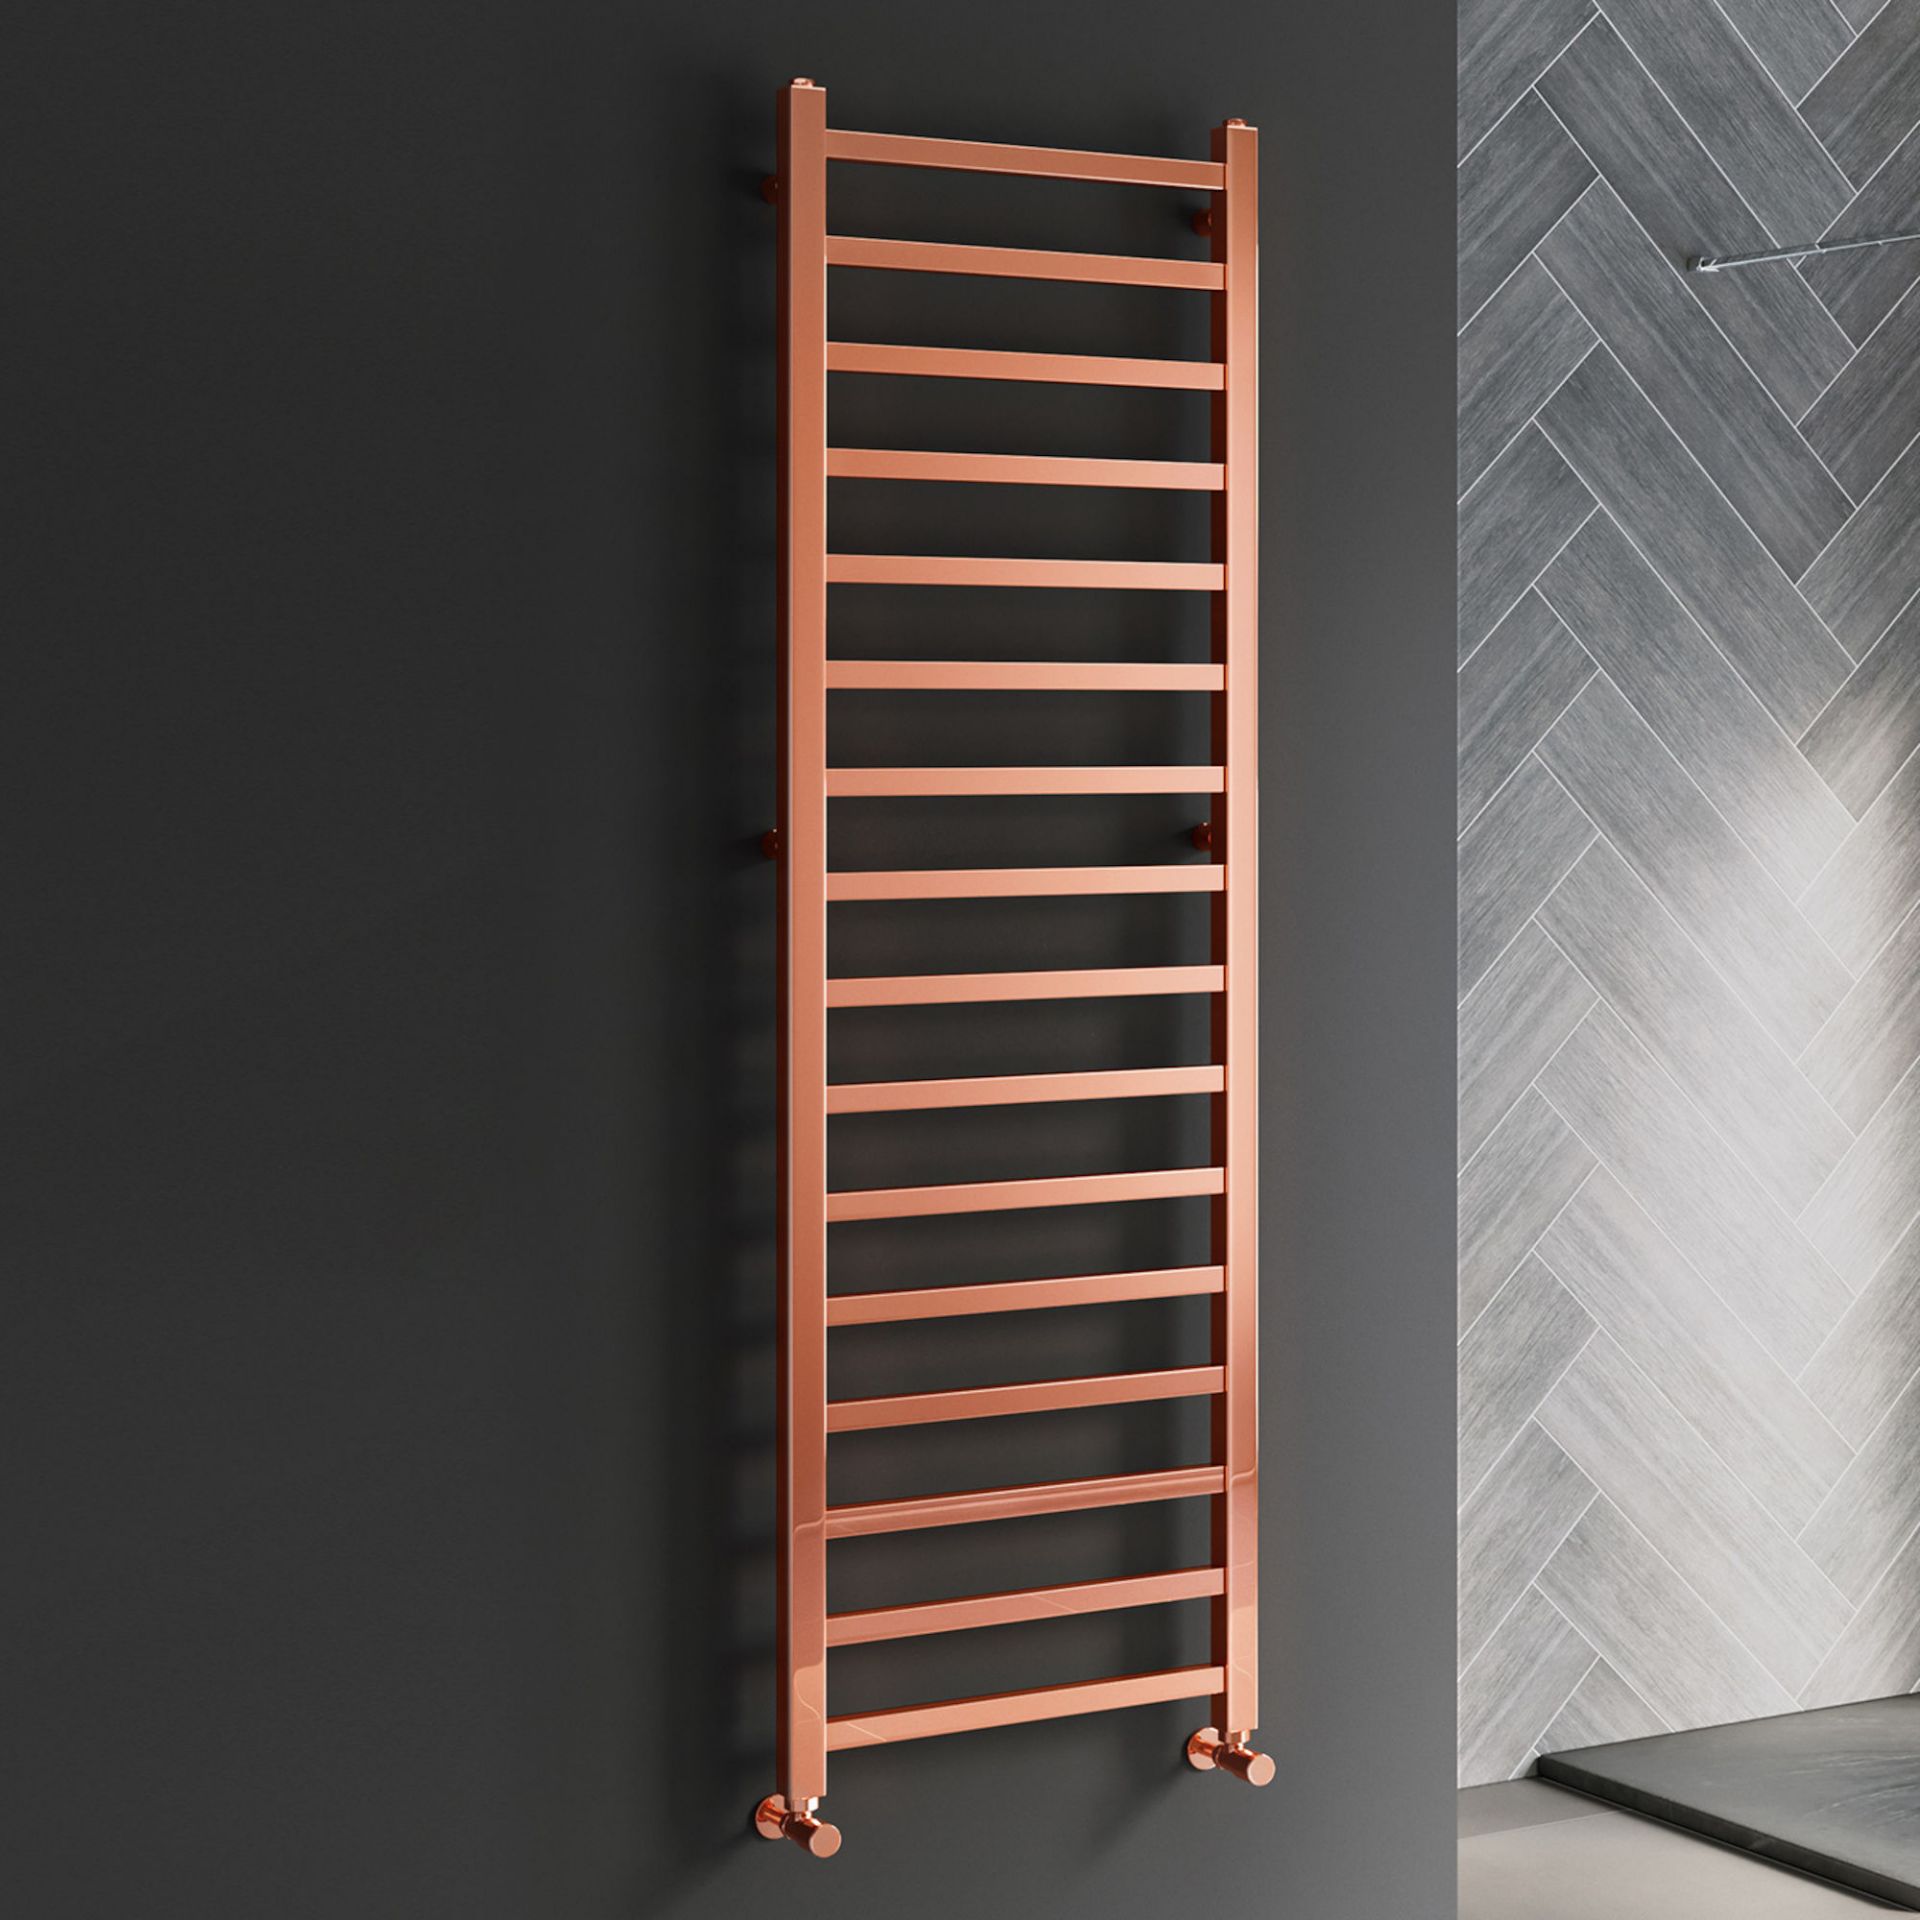 (DD17) 1600x500mm Copper Square Rail Ladder Towel Radiator. Rrp £319.99. Our expertly enginee...